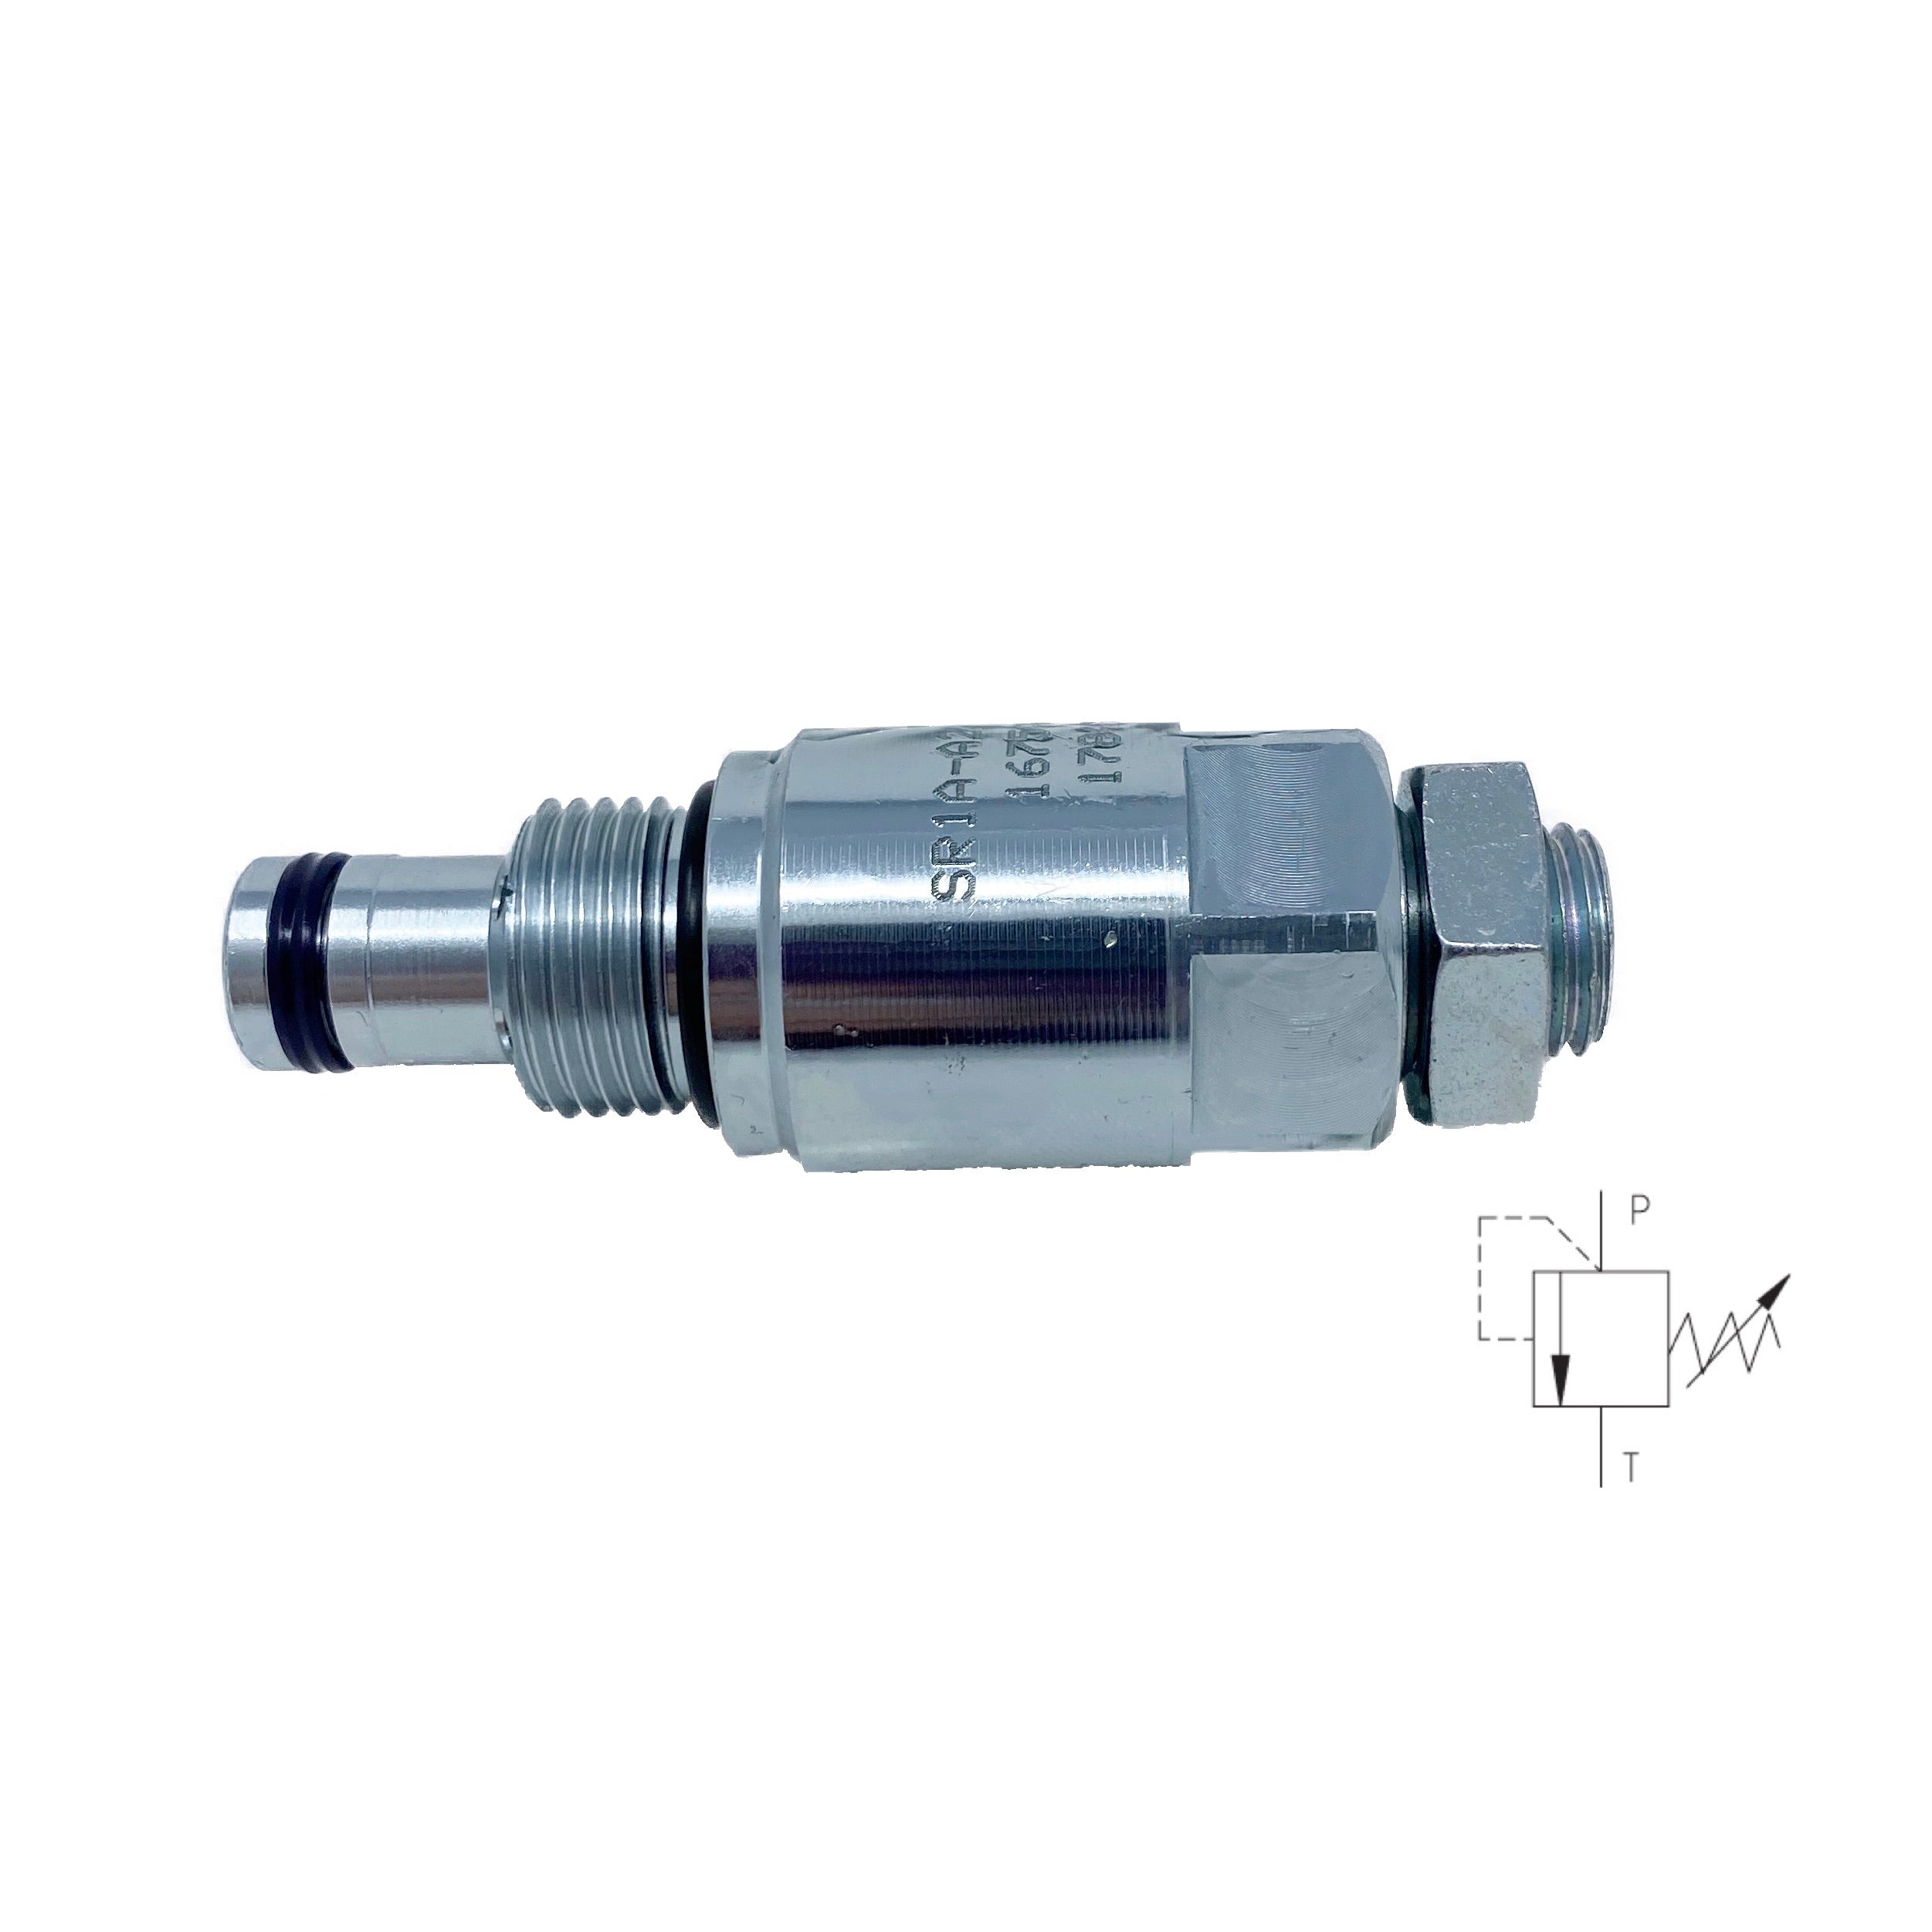 SR1A-A2/L16S-A : Argo Relief, Poppet Type, Direct Acting, 8 GPM, 5100psi, Allen Key, Range to 2320psi, C-8-2 Cavity